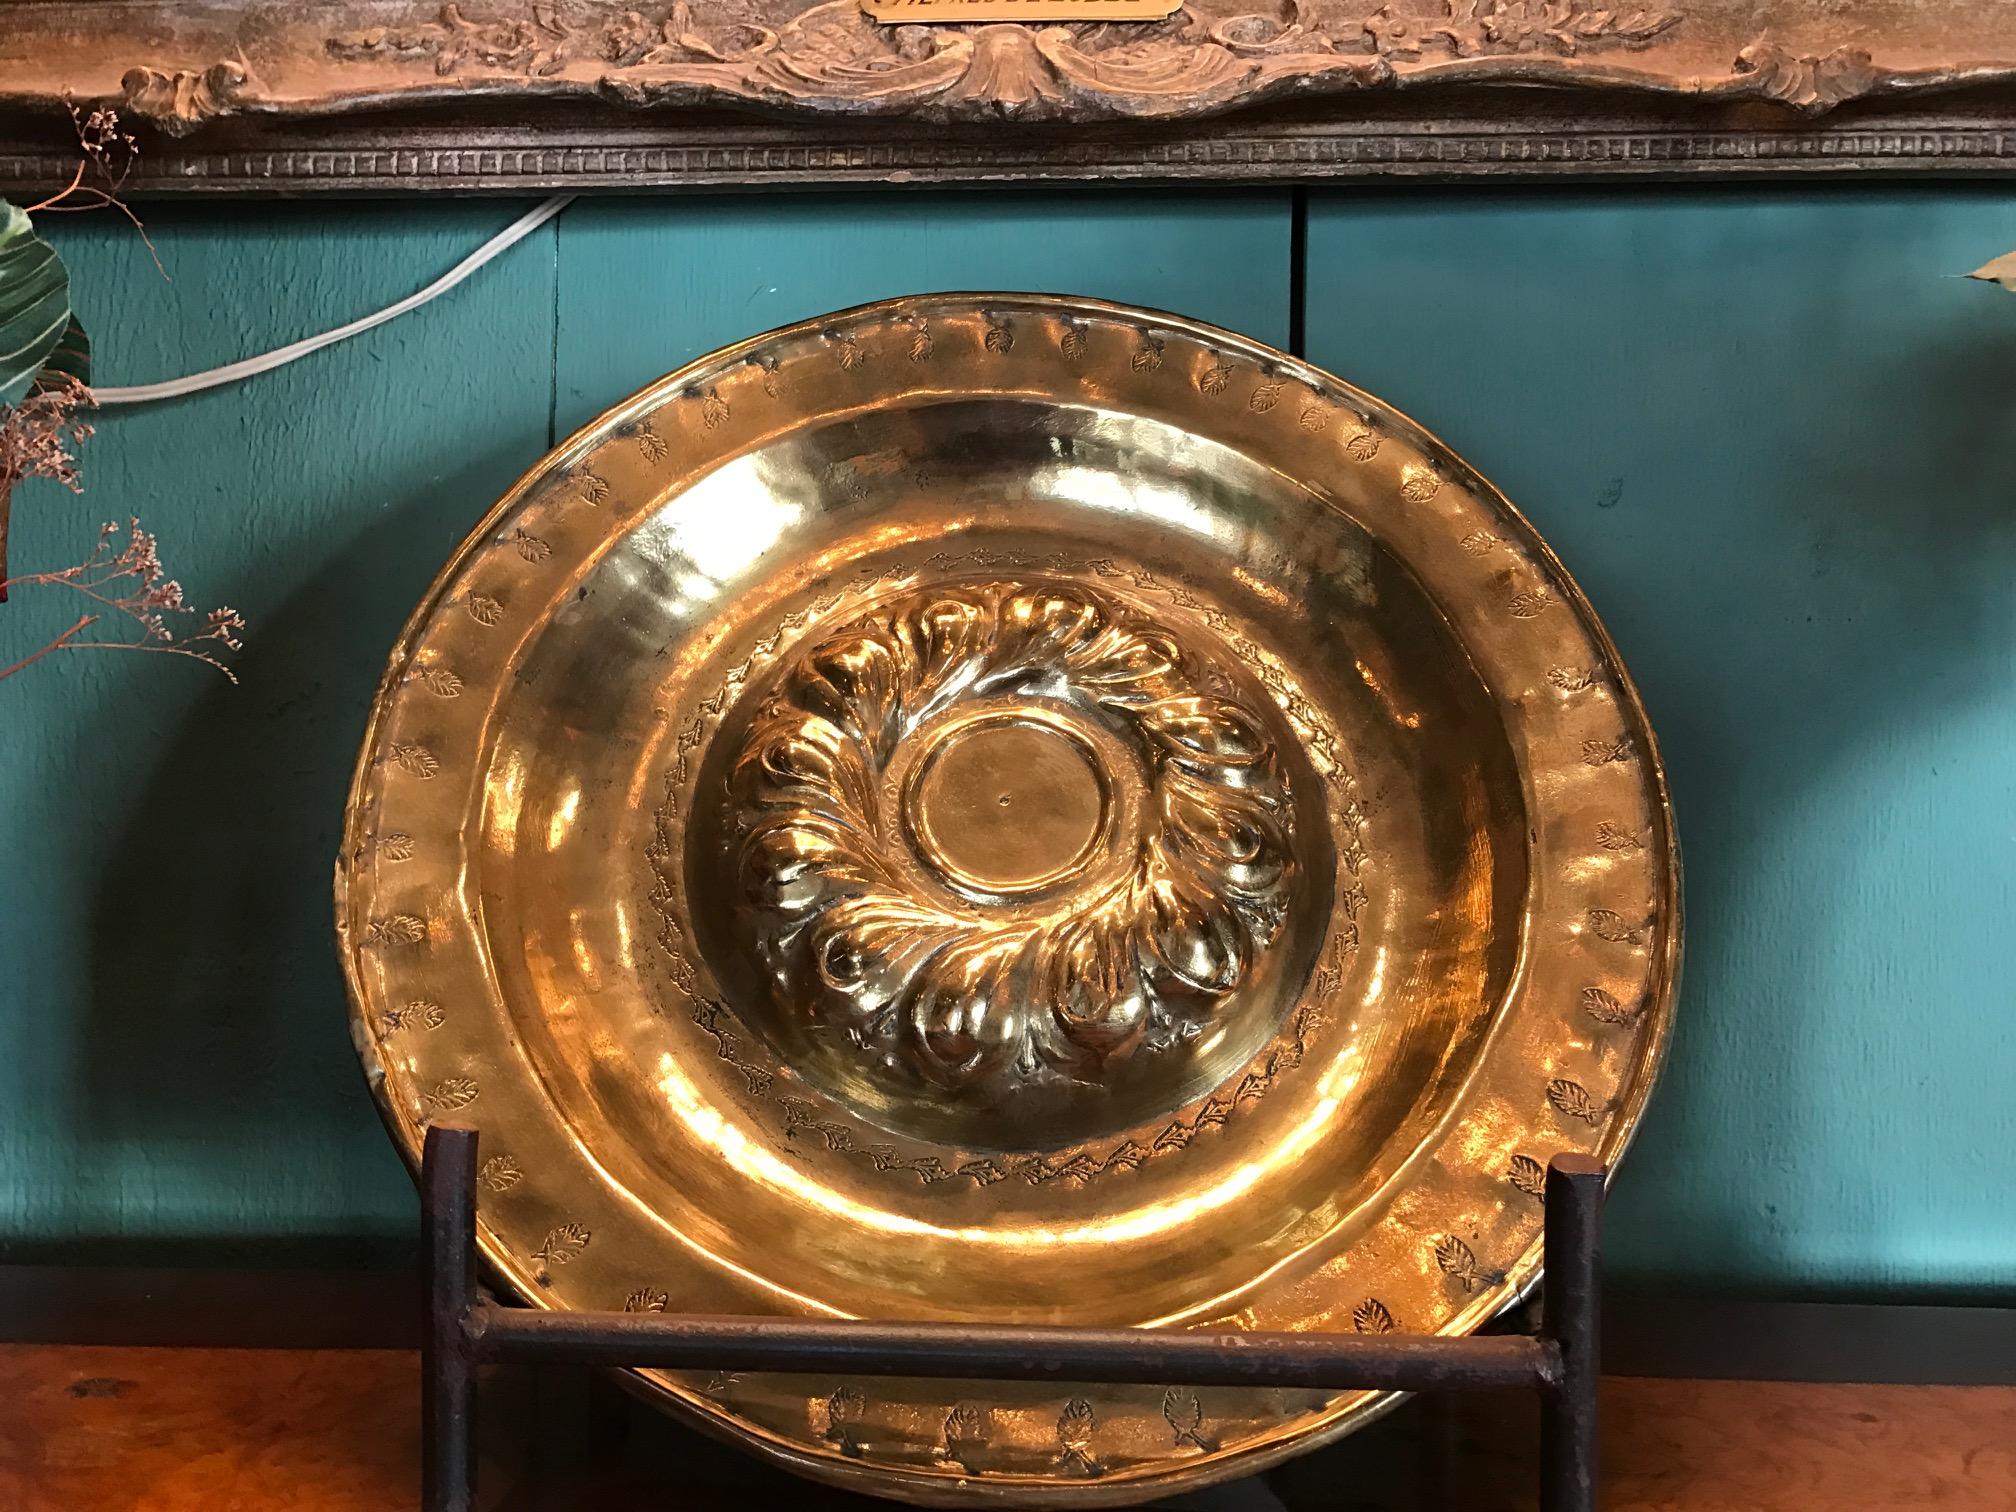 Very rare and real 17th century Alms collecting German Baroque dish with incredible moldings and details. Show a great exuberance. They were meant to impress and show the power of either the church or the king, so they were highly